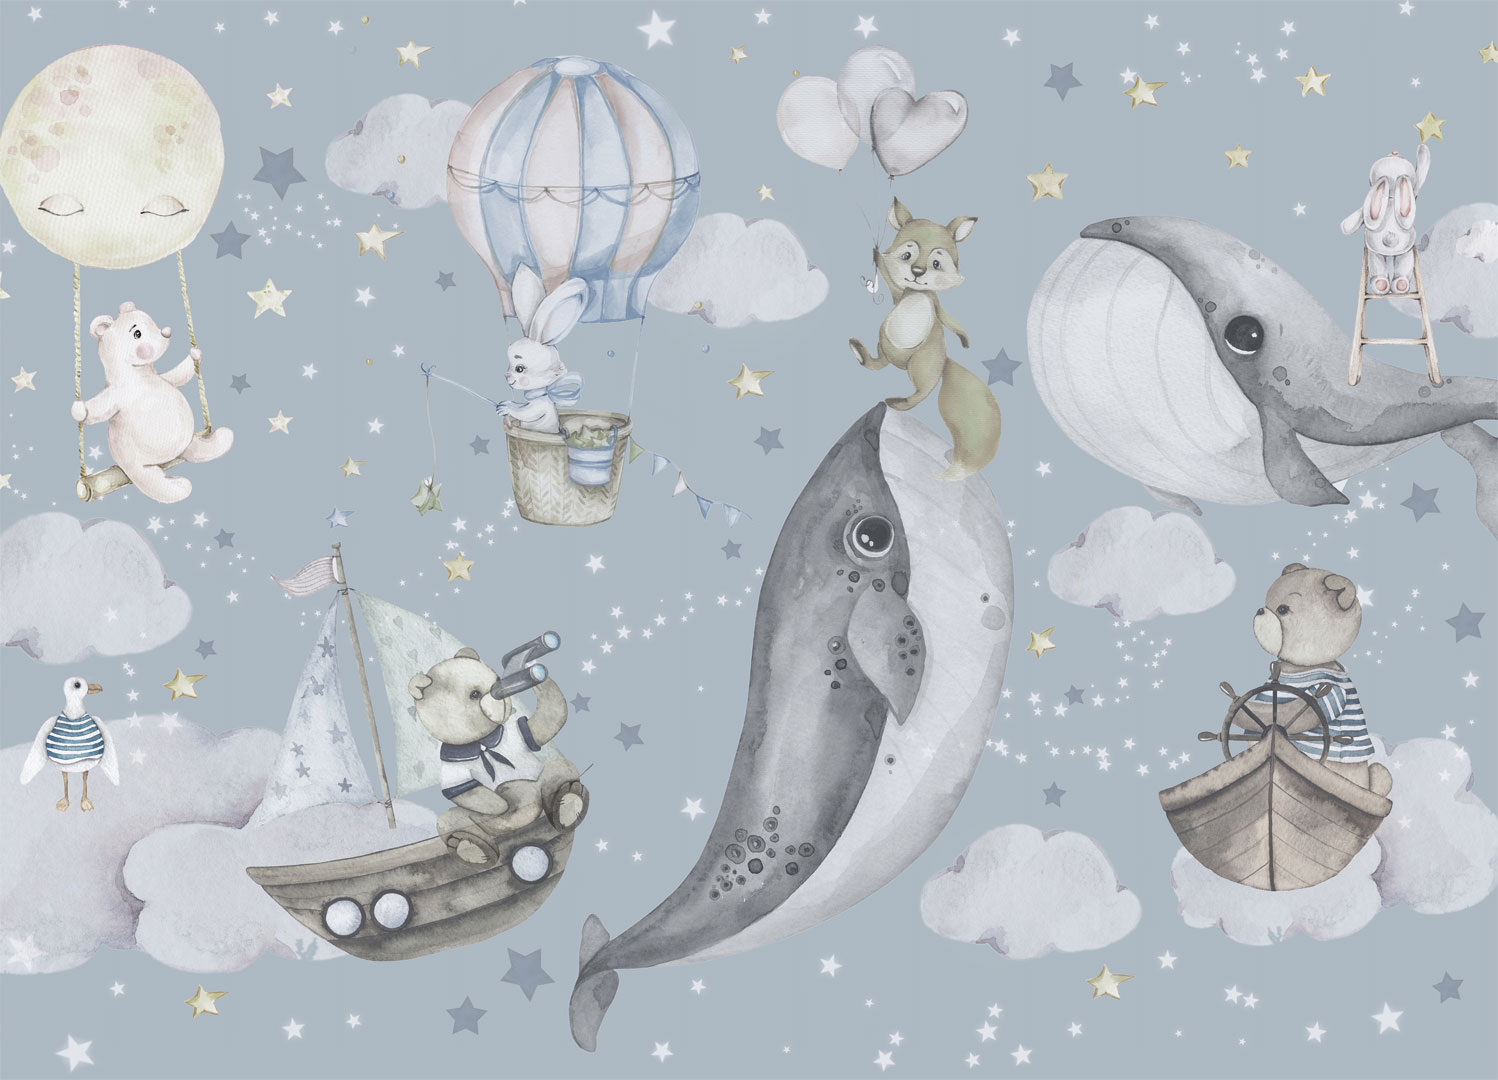 Children's wallpaper for boy or girl, with whales and animals in the clouds, star hunting - Dekoori image 1